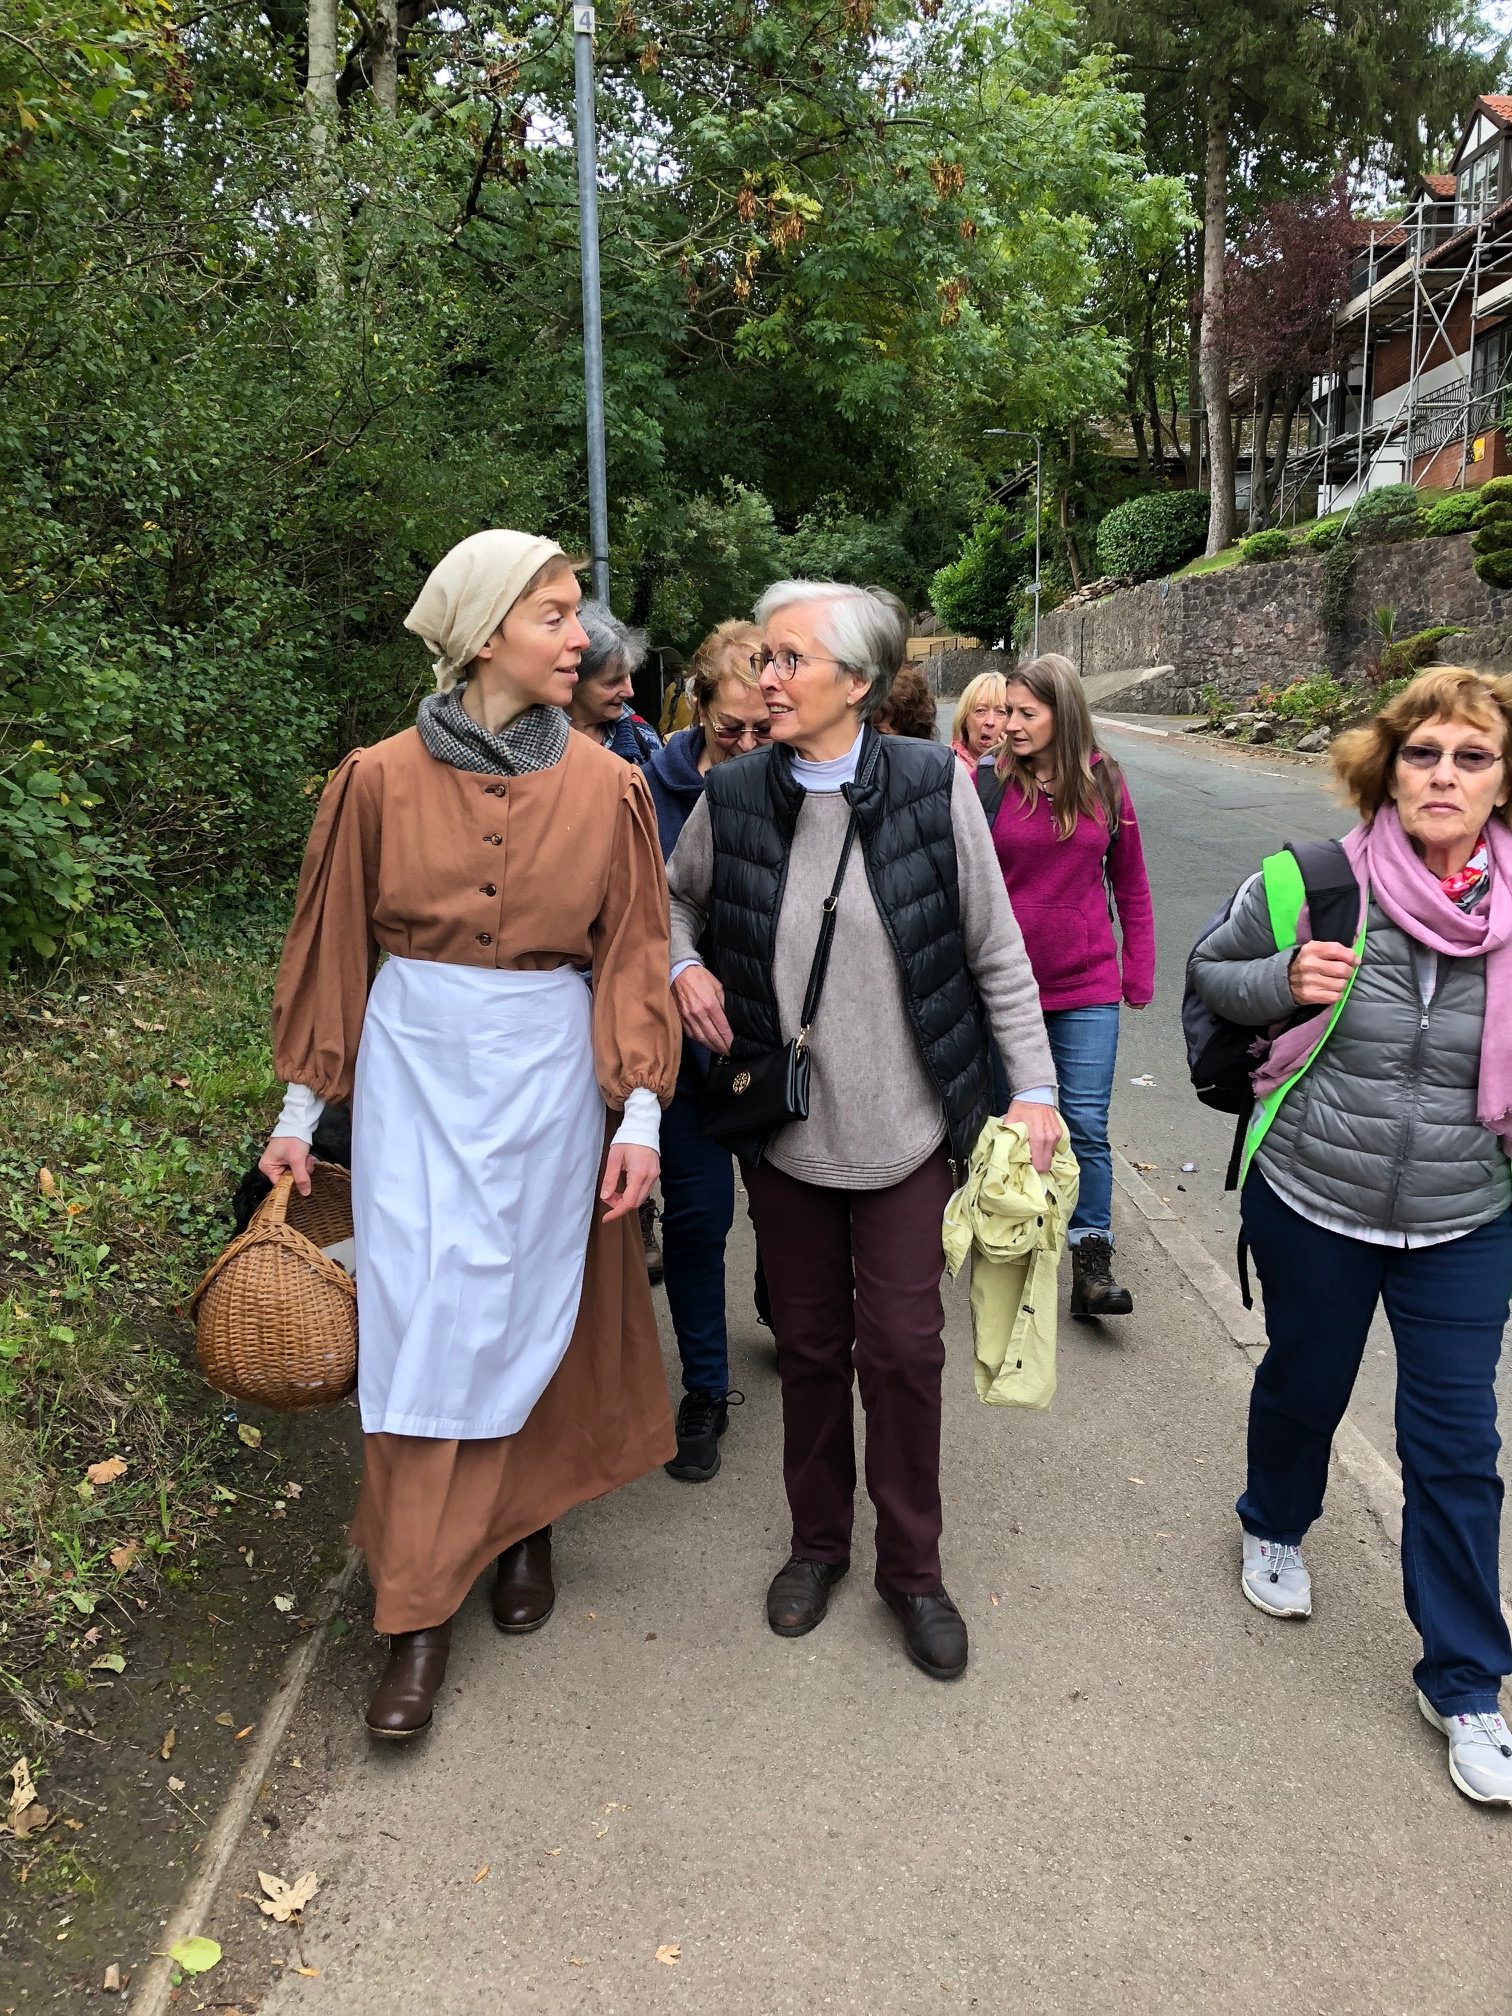 Photo of people walking on the Pilgrimage Way includes "Claire" discusses (in the linked video) why she dresses as a medieval pilgrim and supports Penrhys Pilgrimage Way